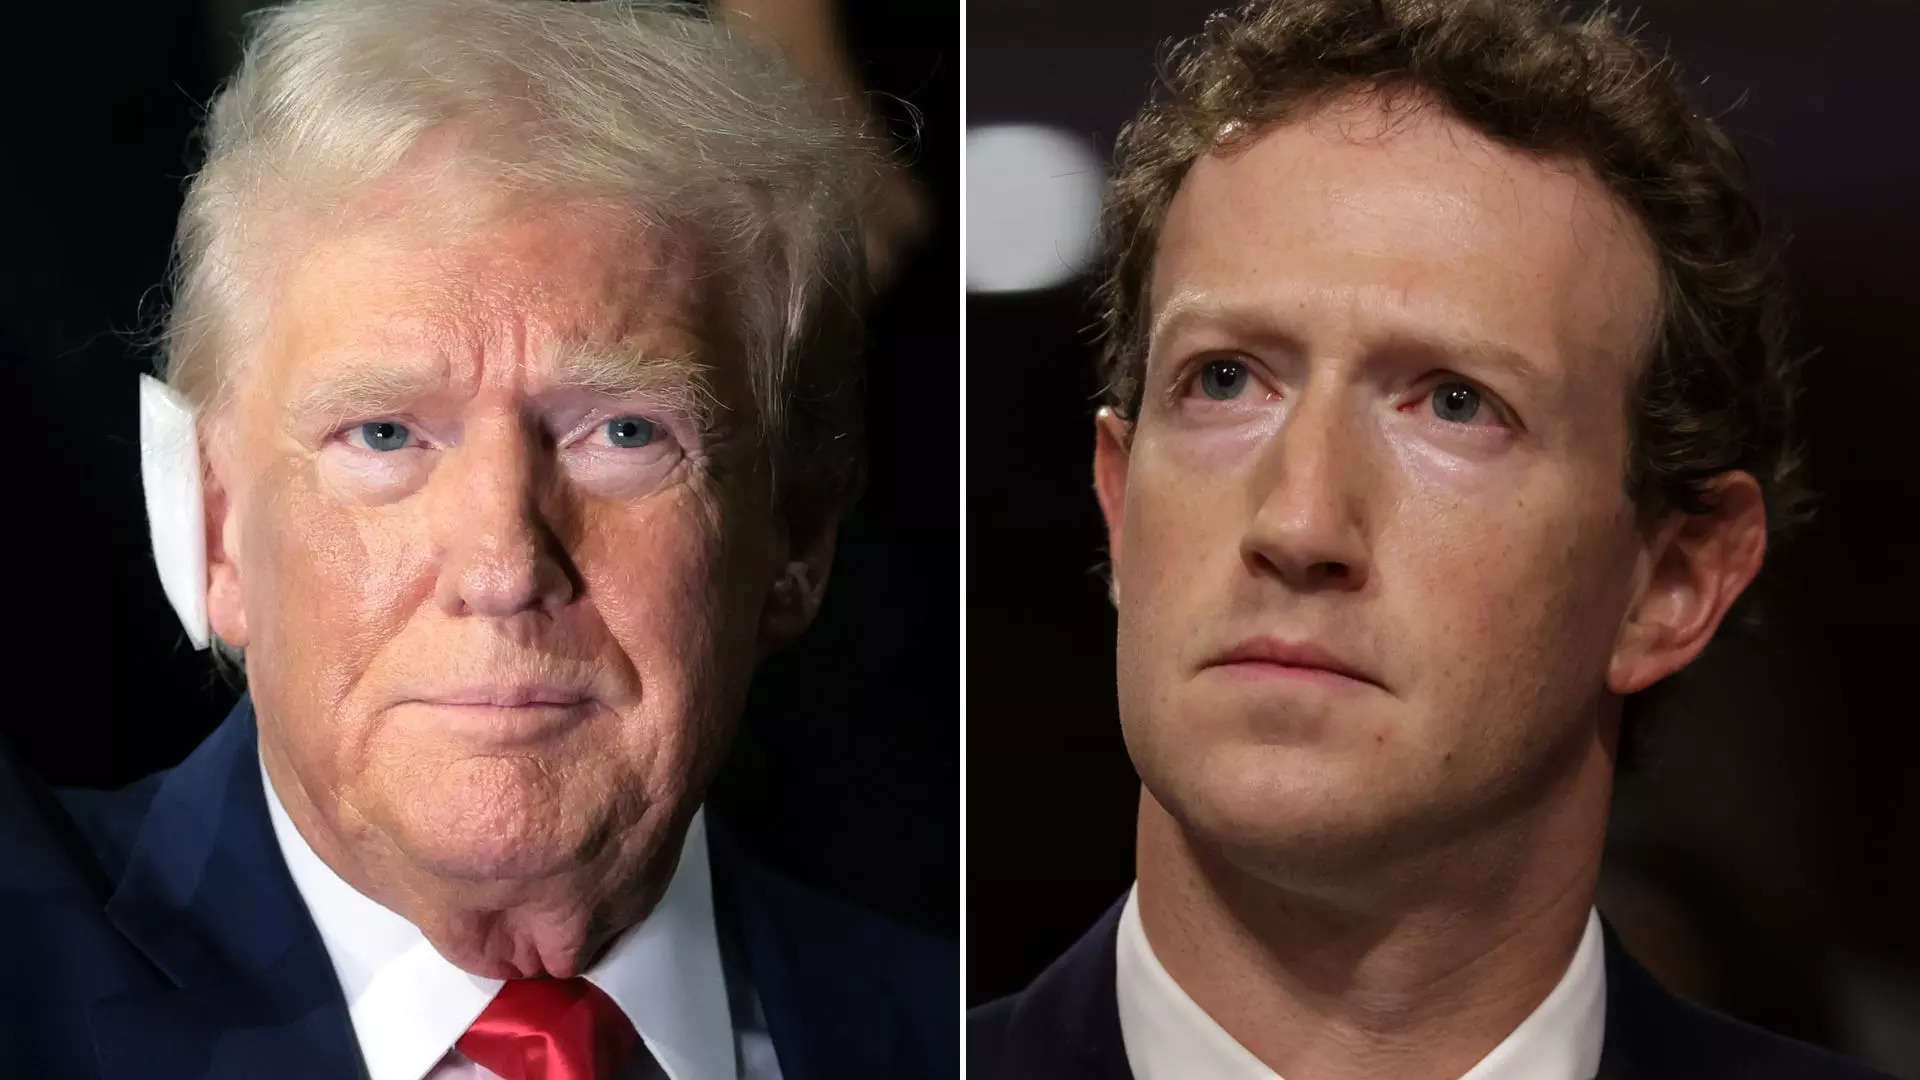 Donald Trump reveals Meta CEO Mark Zuckerberg's apology over Facebook photo error: Here's everything you need to know 